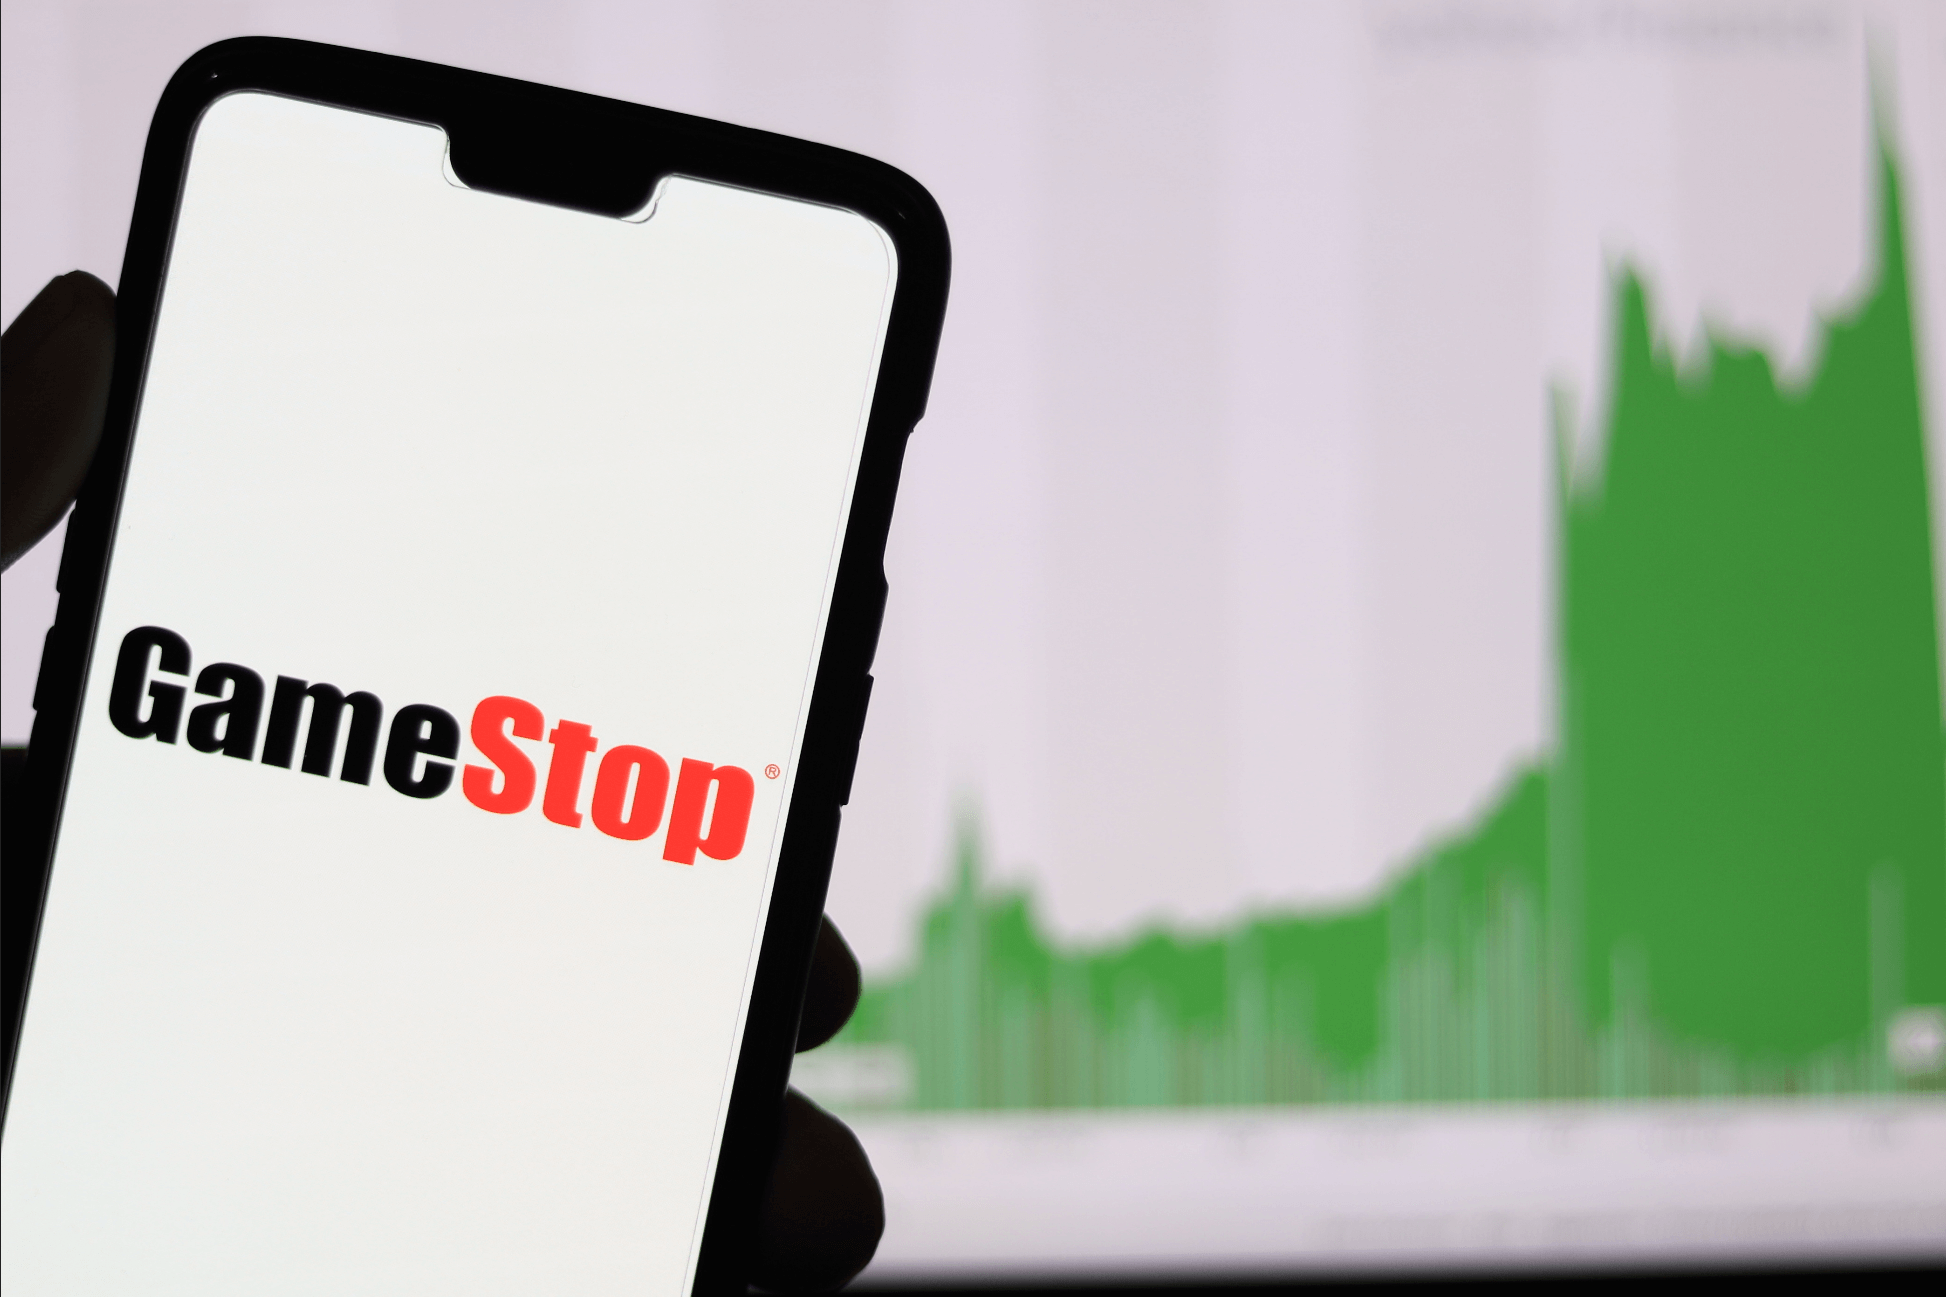 GameStop 'Round 2' Begins: GME Jumps on Another Roller-Coaster